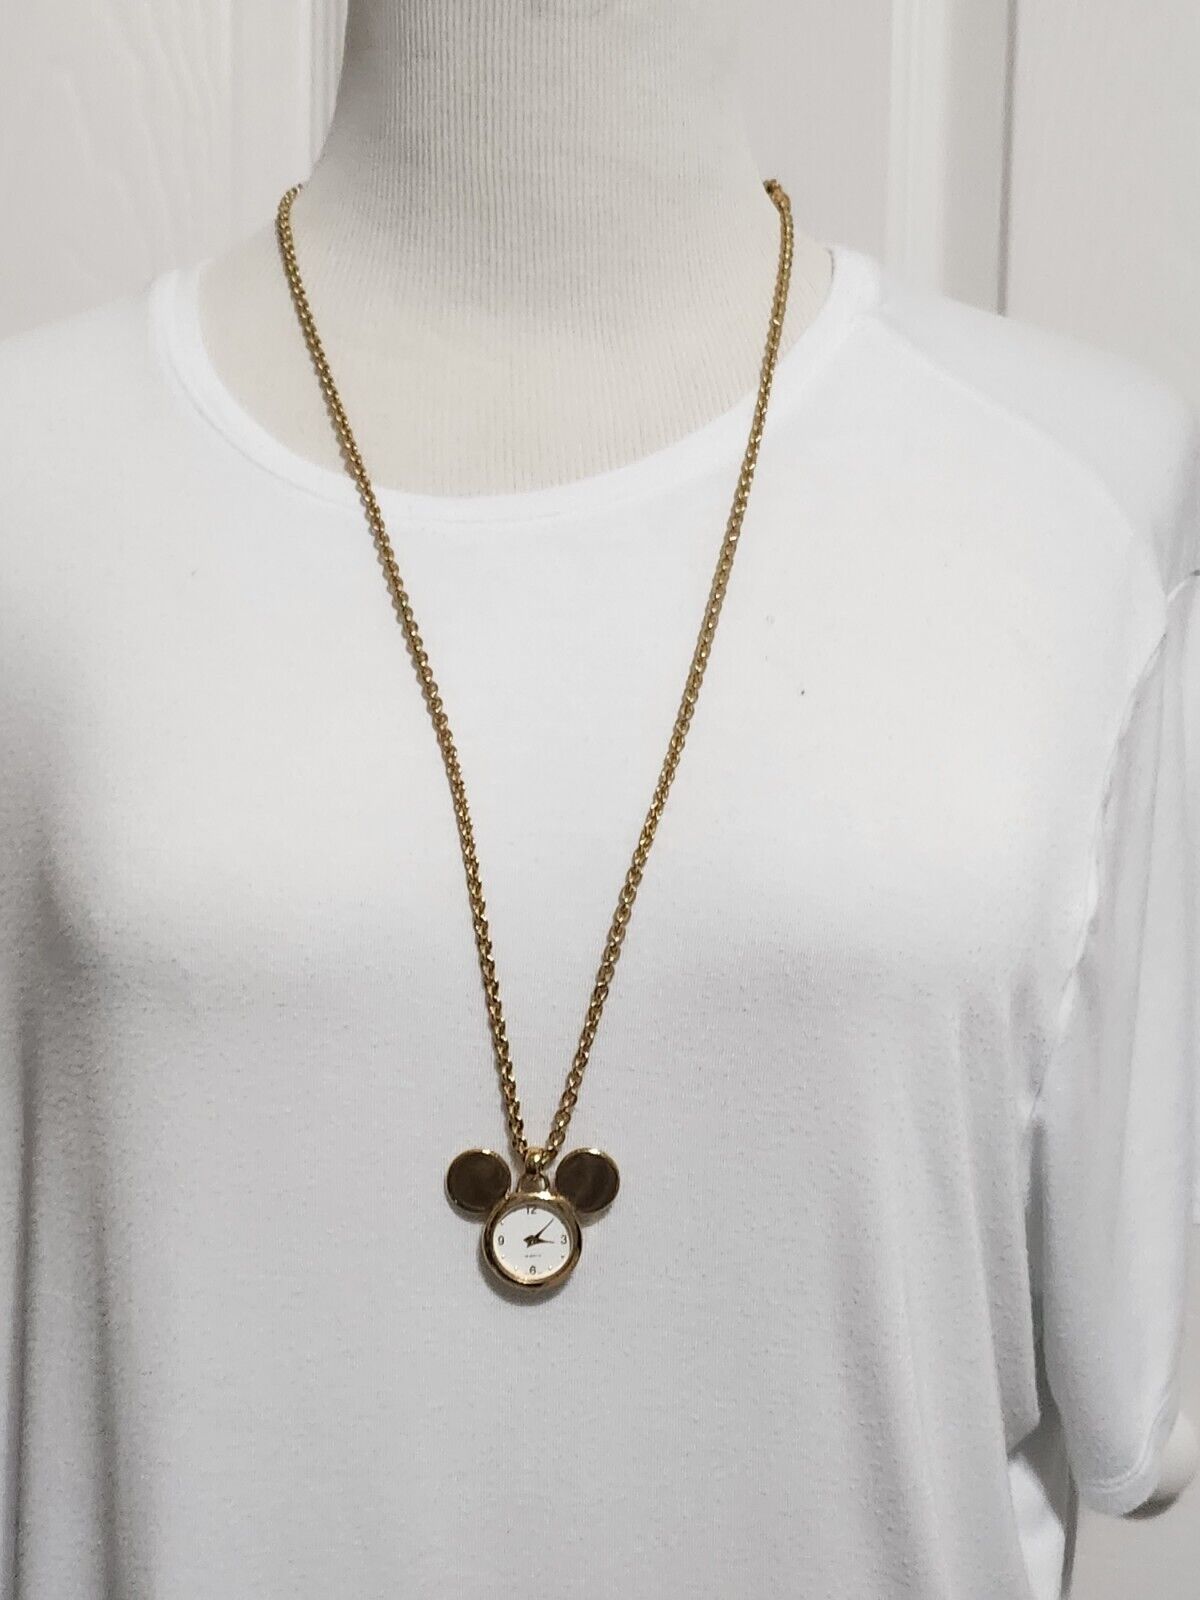 Napier Mickey Mouse Quartz Watch Necklace with 24 inch Goldtone Chain